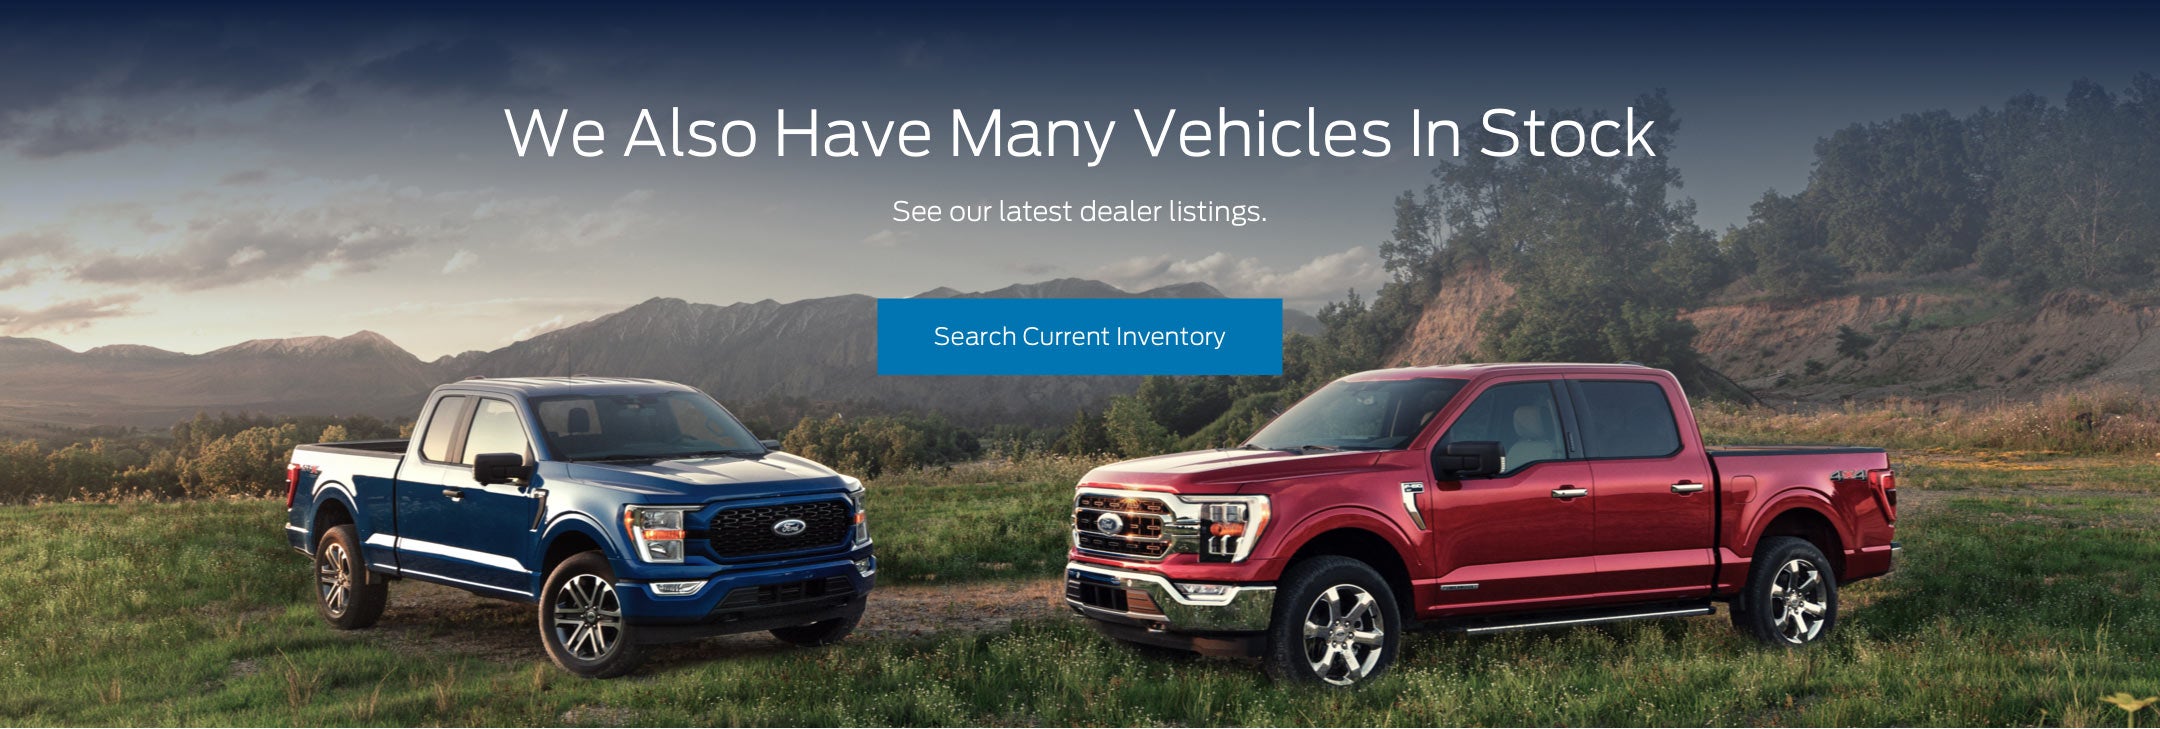 Ford vehicles in stock | Thoroughbred Ford of Platte City, Inc. in Platte City MO